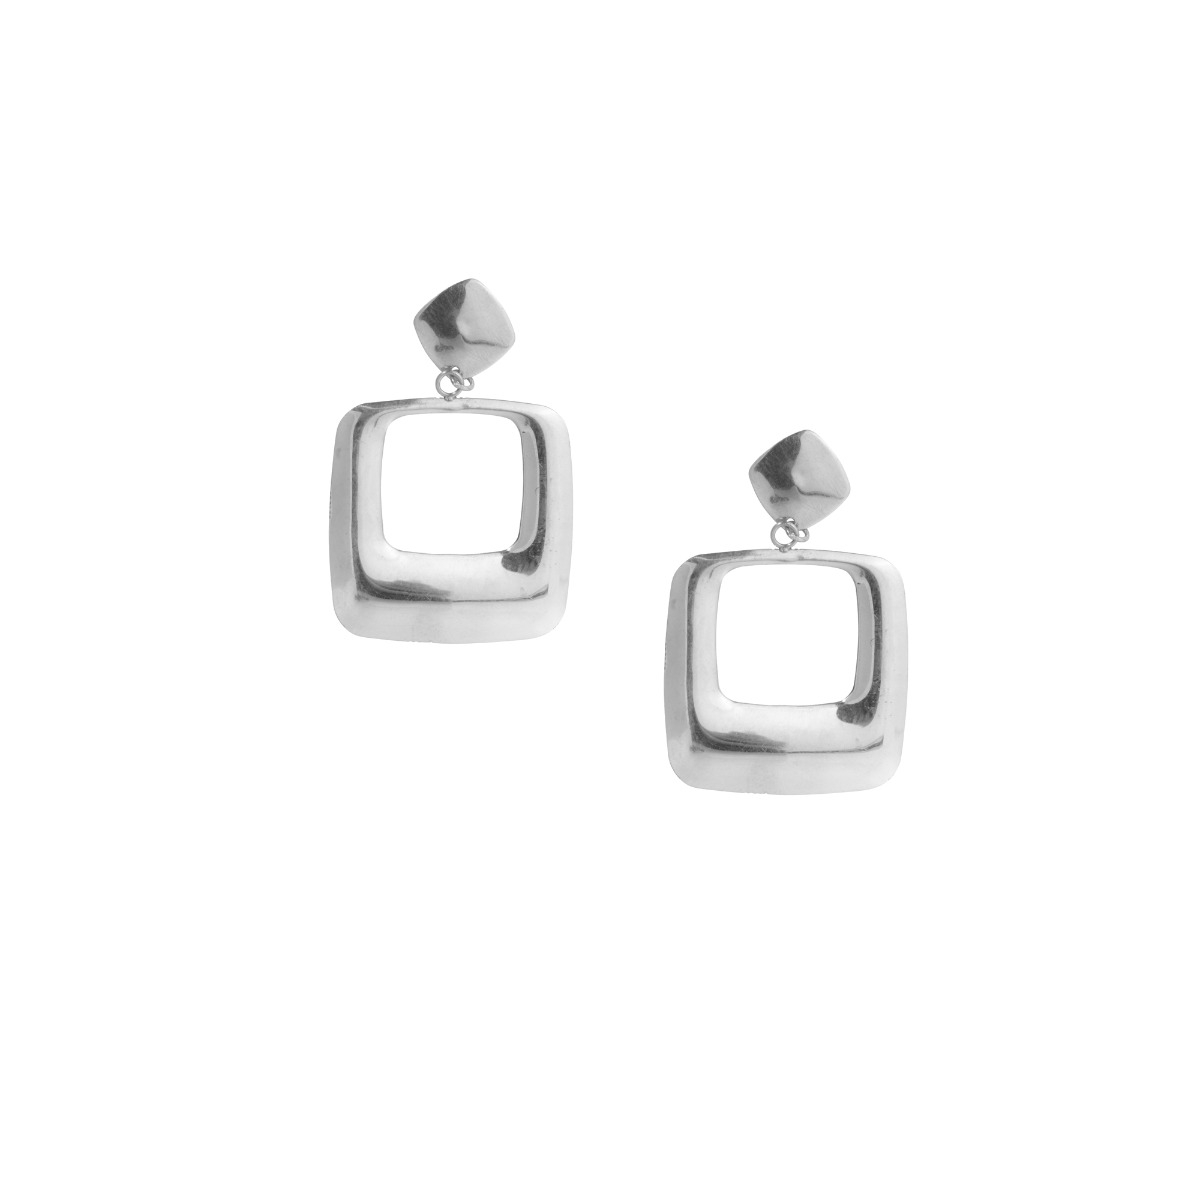 Square Earrings in High-Polished Silver